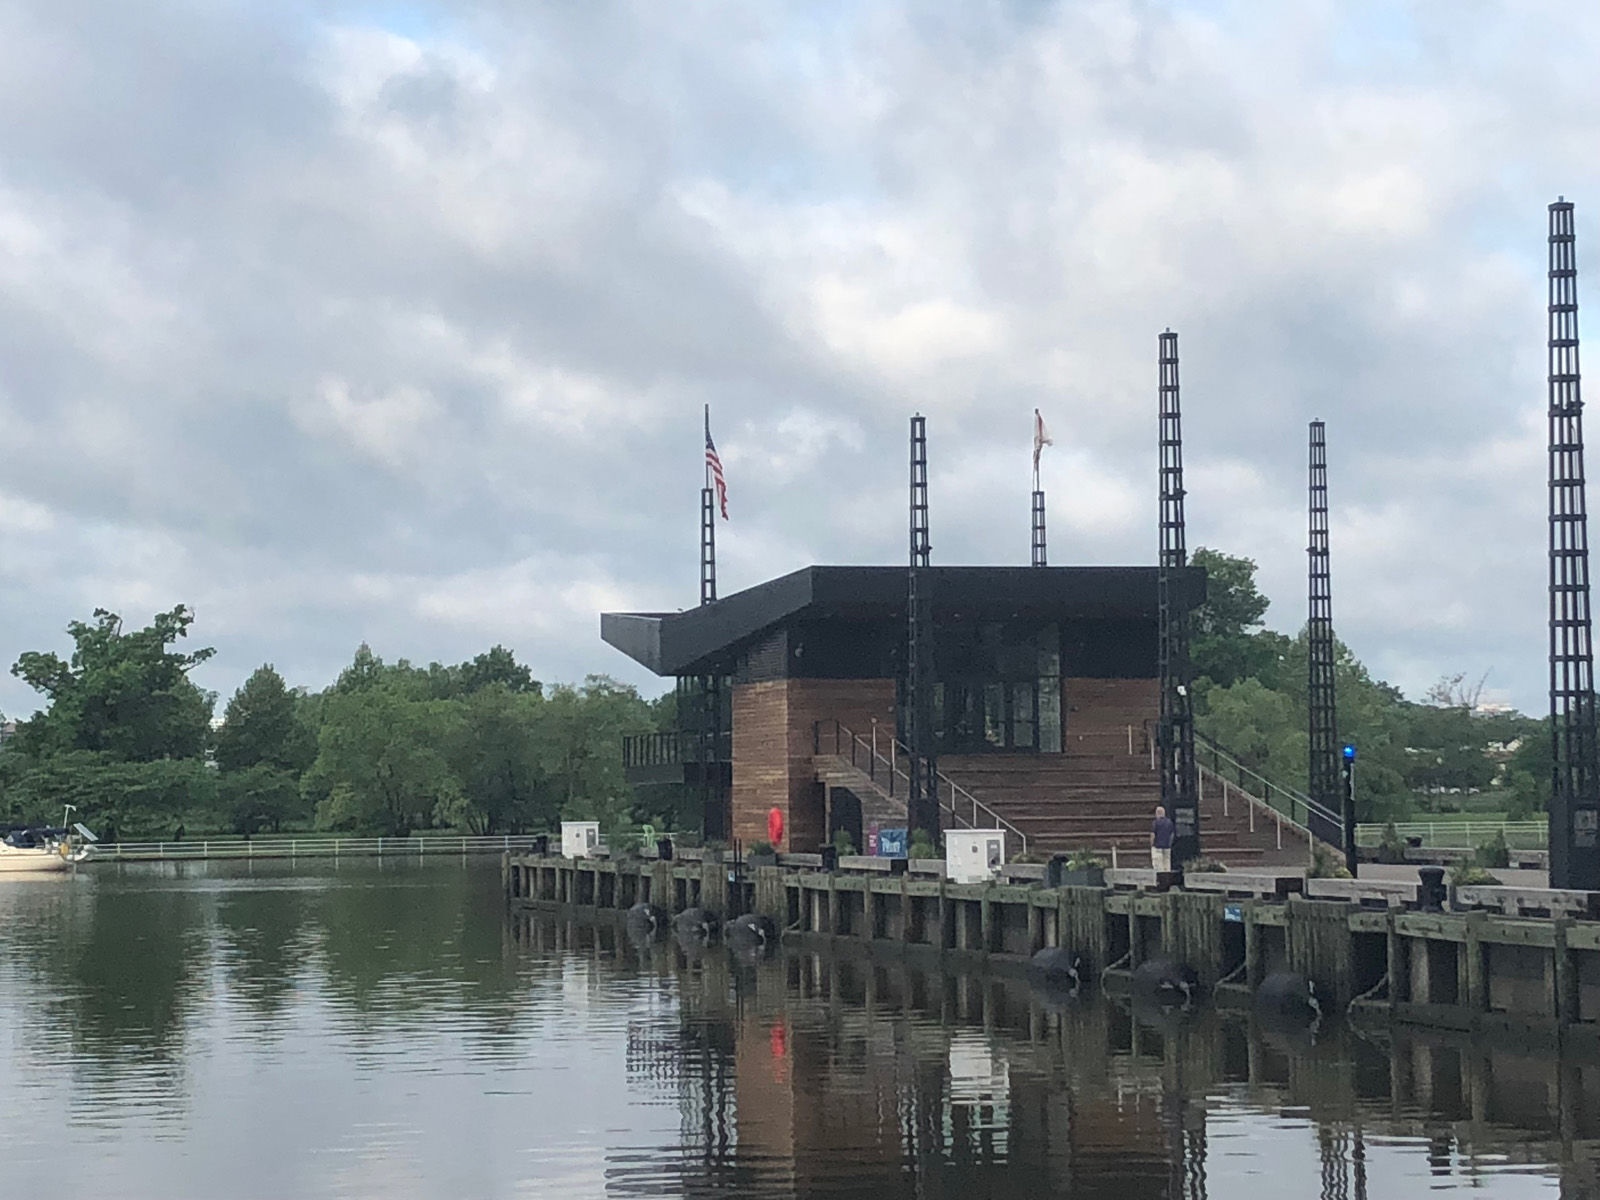 The weather service said there will be a prolonged period of at least minor flooding with moderate flooding during high tide through Sunday evening, especially north of Hains Point. (WTOP/Melissa Howell)